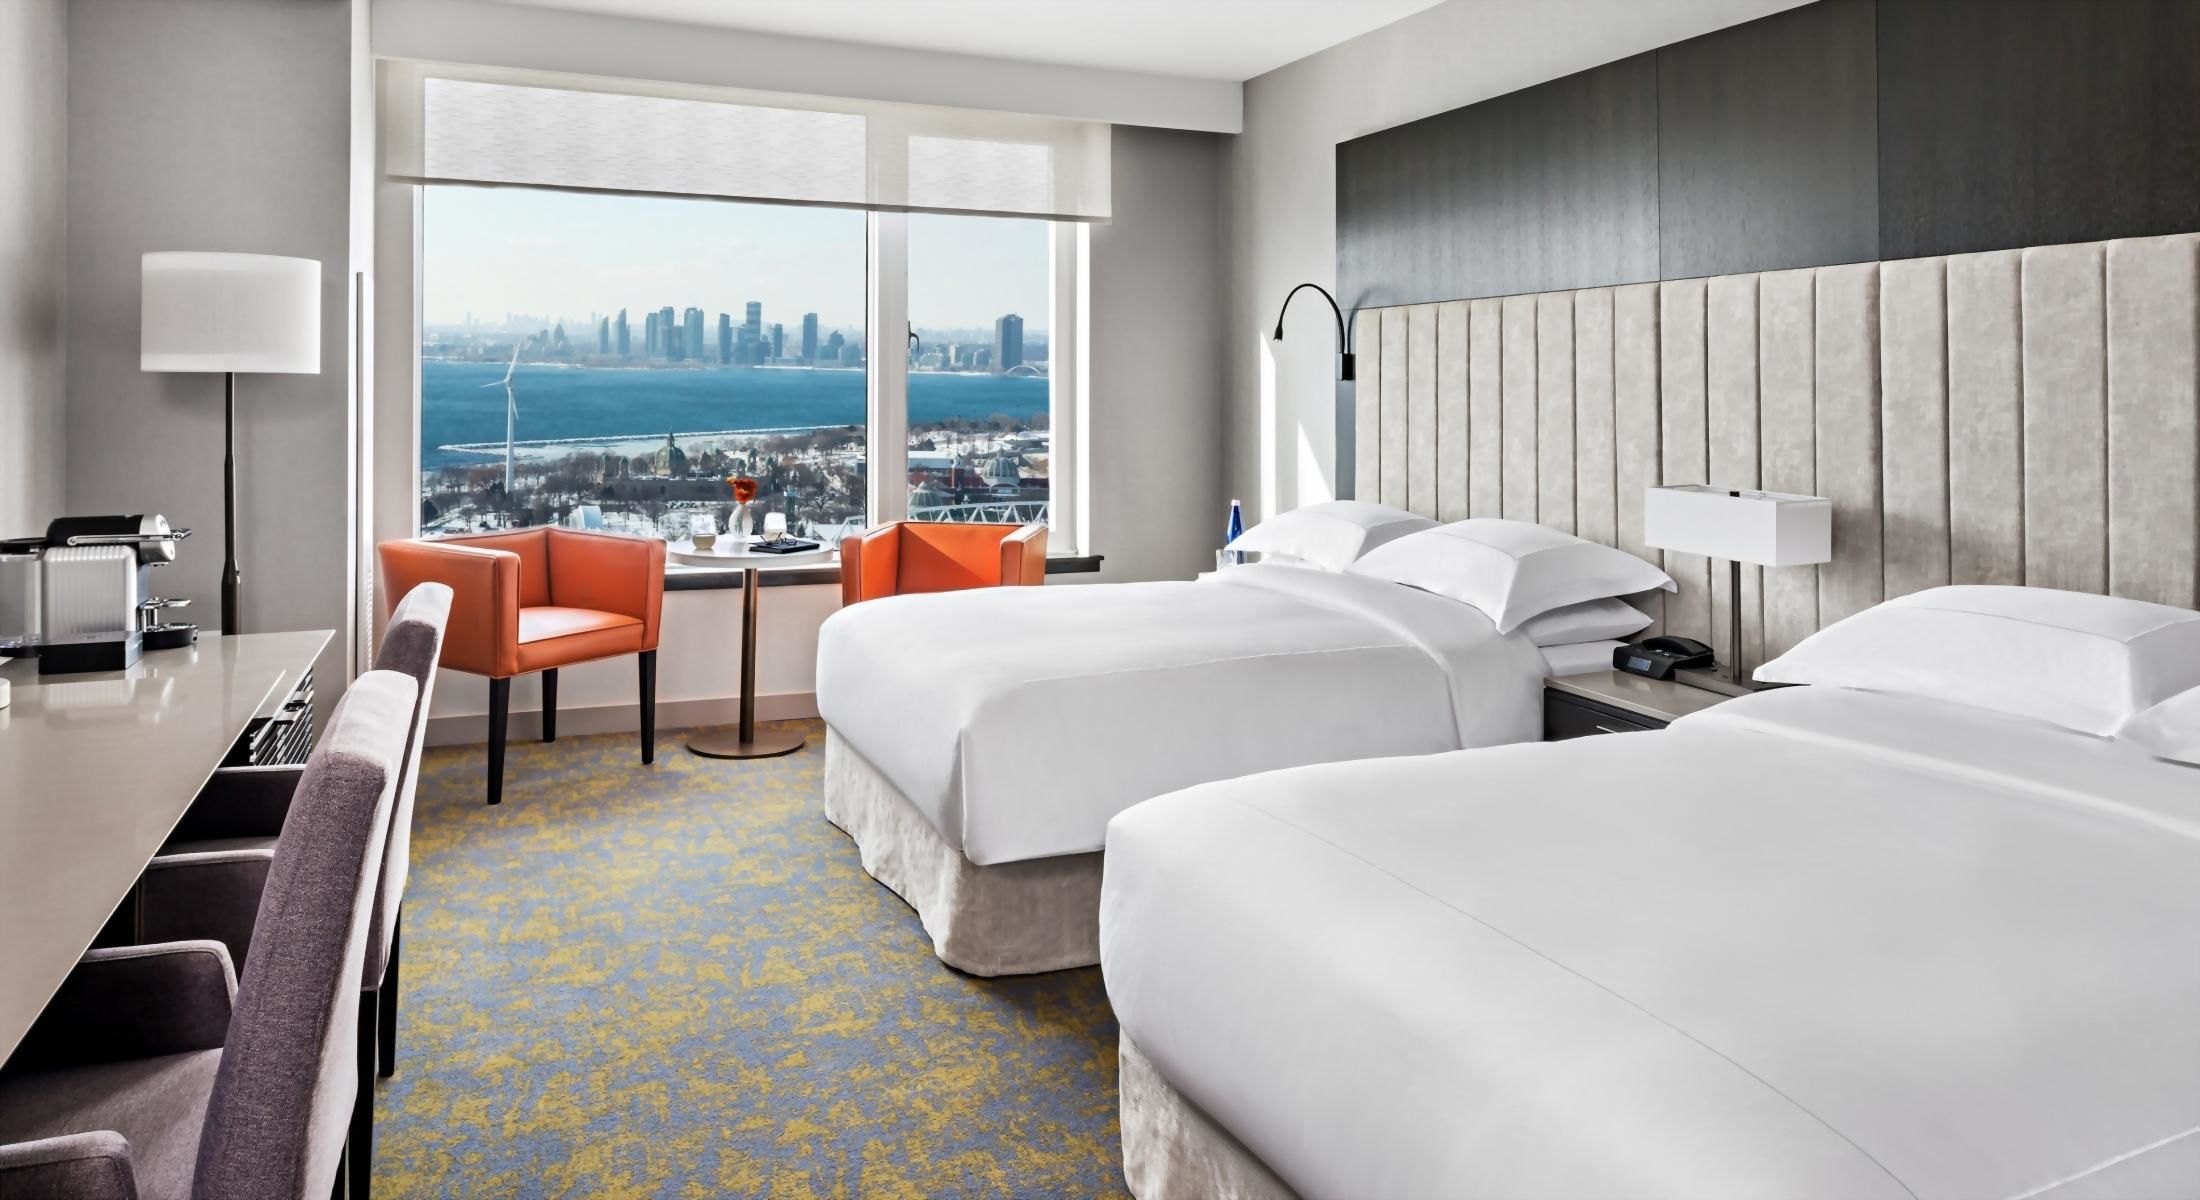 Our Signature Room with 2 Queen Beds features a large desk space, 2 arm chairs, and city views.